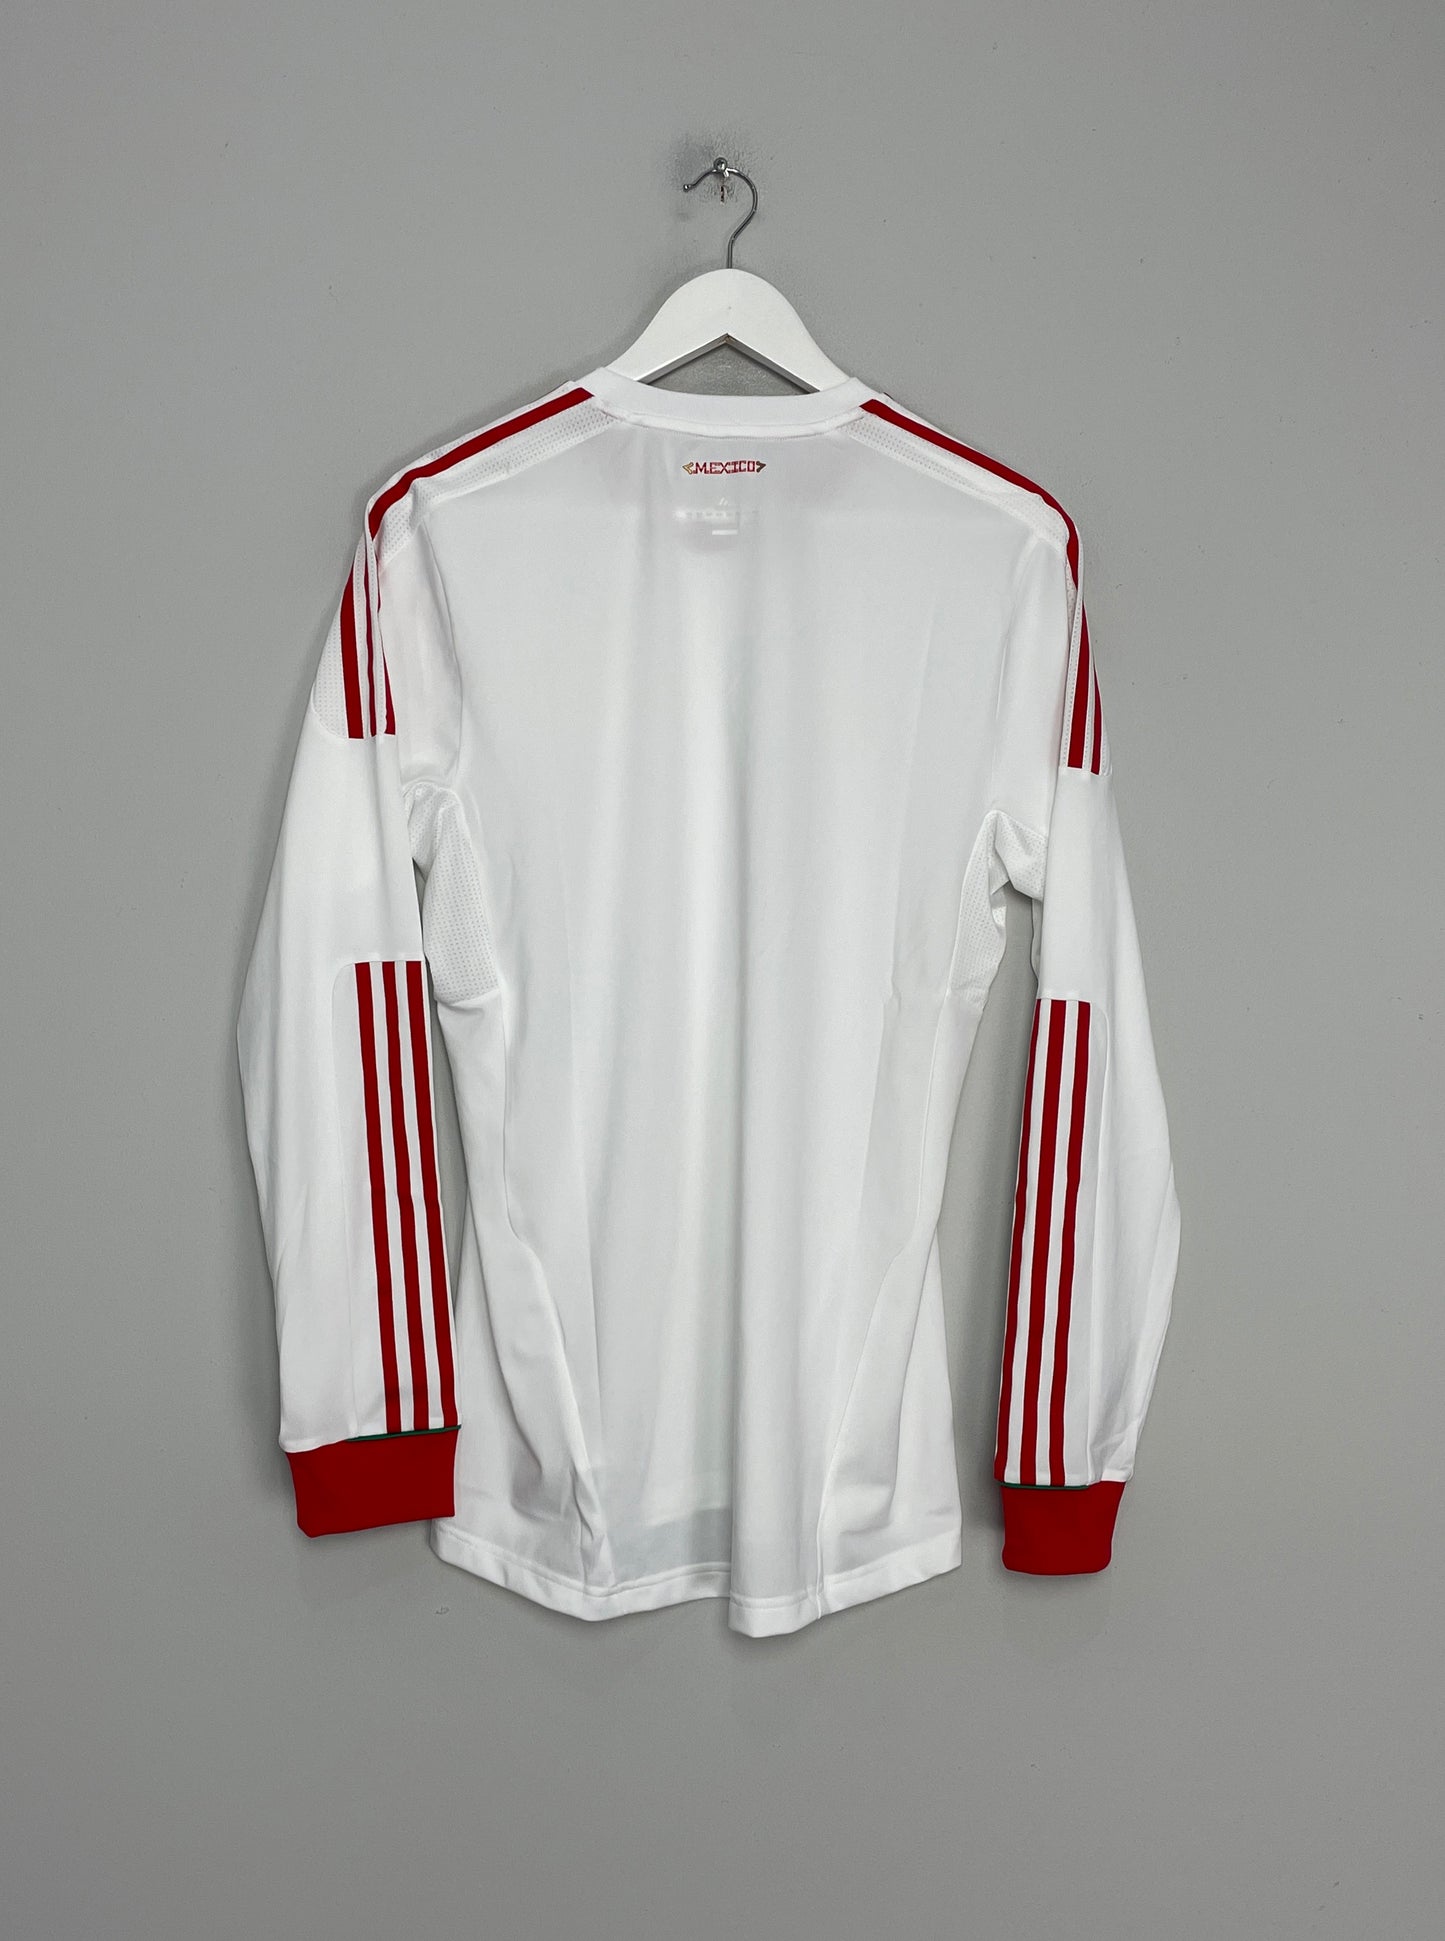 2011/12 MEXICO L/S *PLAYER ISSUE* AWAY SHIRT (L) ADIDAS